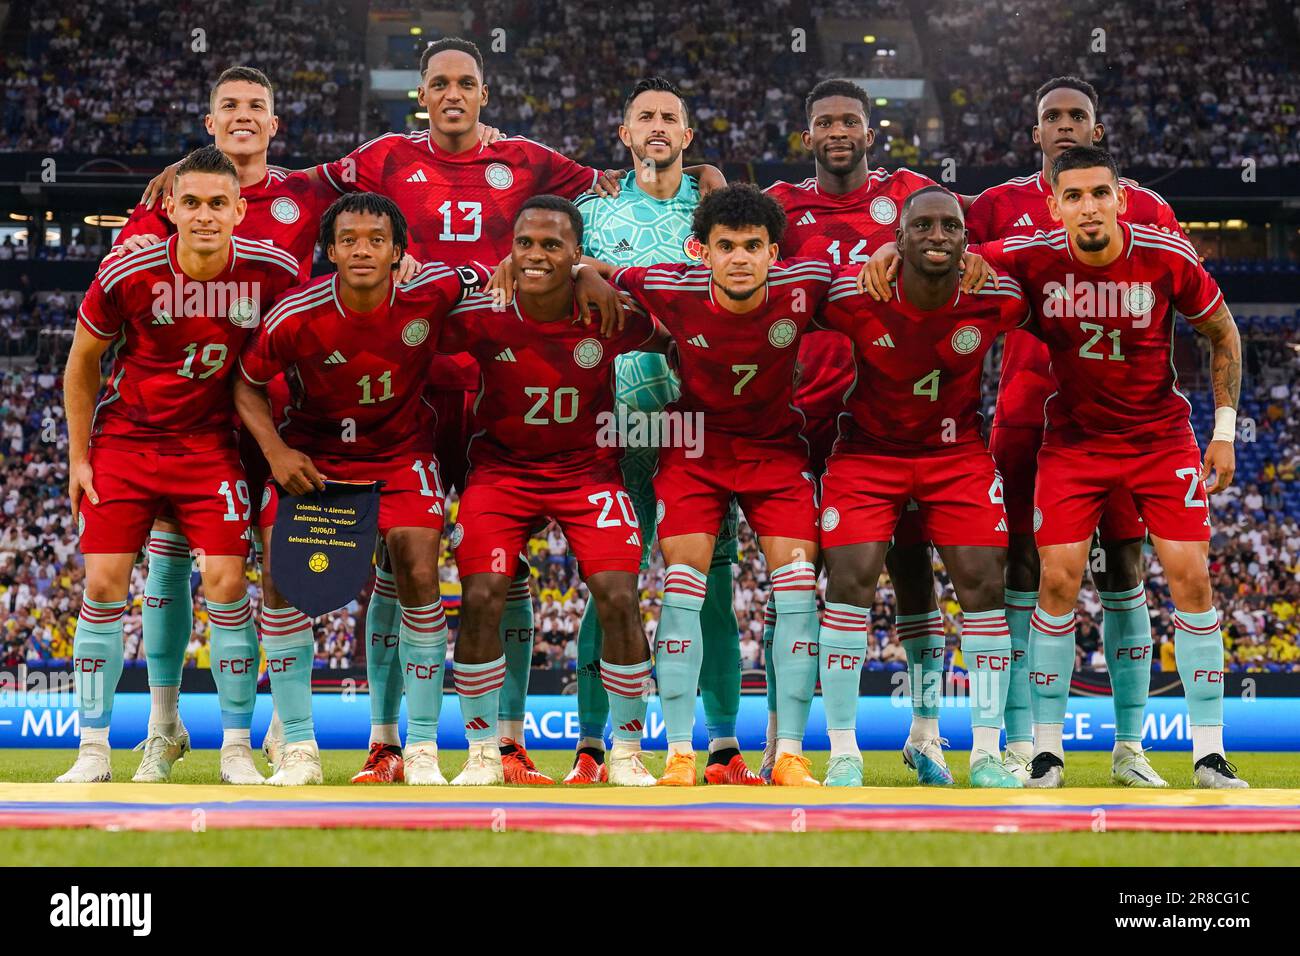 GELSENKIRCHEN, GERMANY - JUNE 20: Teamphoto of Colombia, (back row L-R) Mateus Uribe of Colombia, Yerry Mina of Colombia, Goalkeeper Camilo Vargas of Colombia, Jefferson Lerma of Colombia, Jhon Lucumi of Colombia, (front row L-R) Rafael Santos Borre of Colombia, Juan Cuadrado of Colombia, Jhon Arias of Colombia, Luis Diaz of Colombia, Deiver Machado of Colombia, Daniel Munoz of Colombia during the International Friendly match between Germany and Colombia at the Veltins-Arena on June 20, 2023 in Gelsenkirchen, Germany (Photo by Joris Verwijst/Orange Pictures) Stock Photo